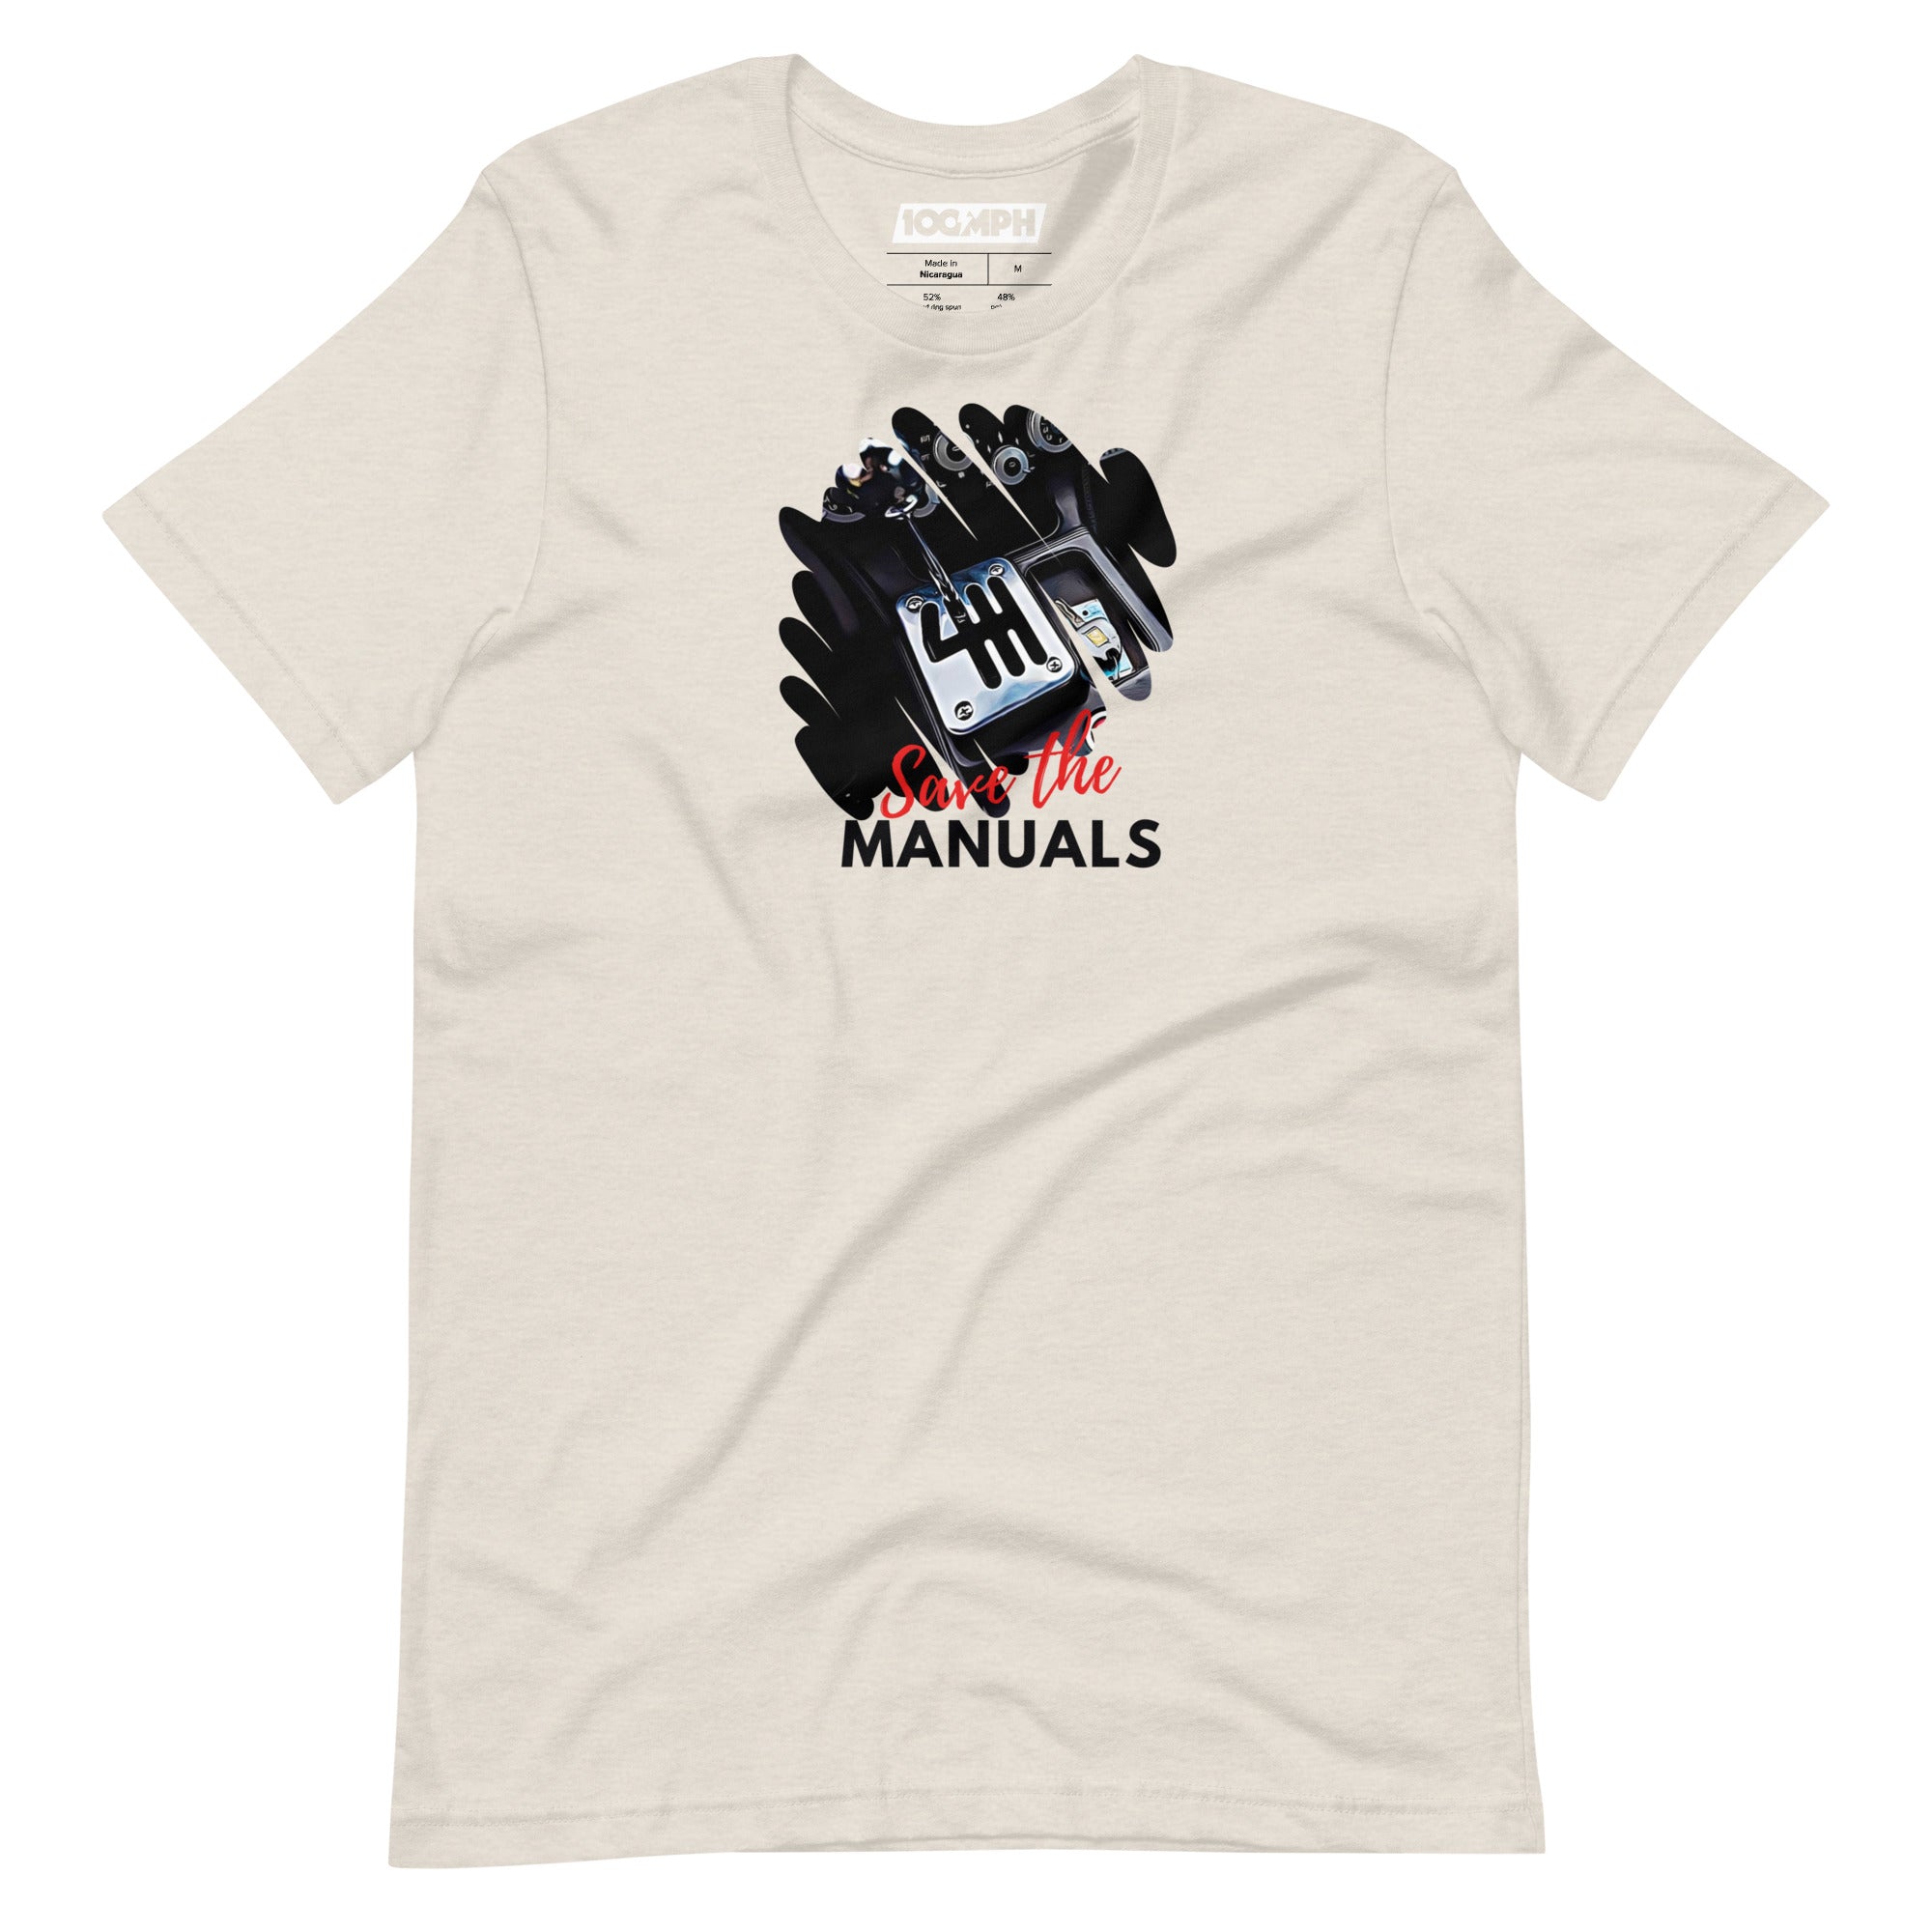 "Save the Manuals Gated" Tee Shirt